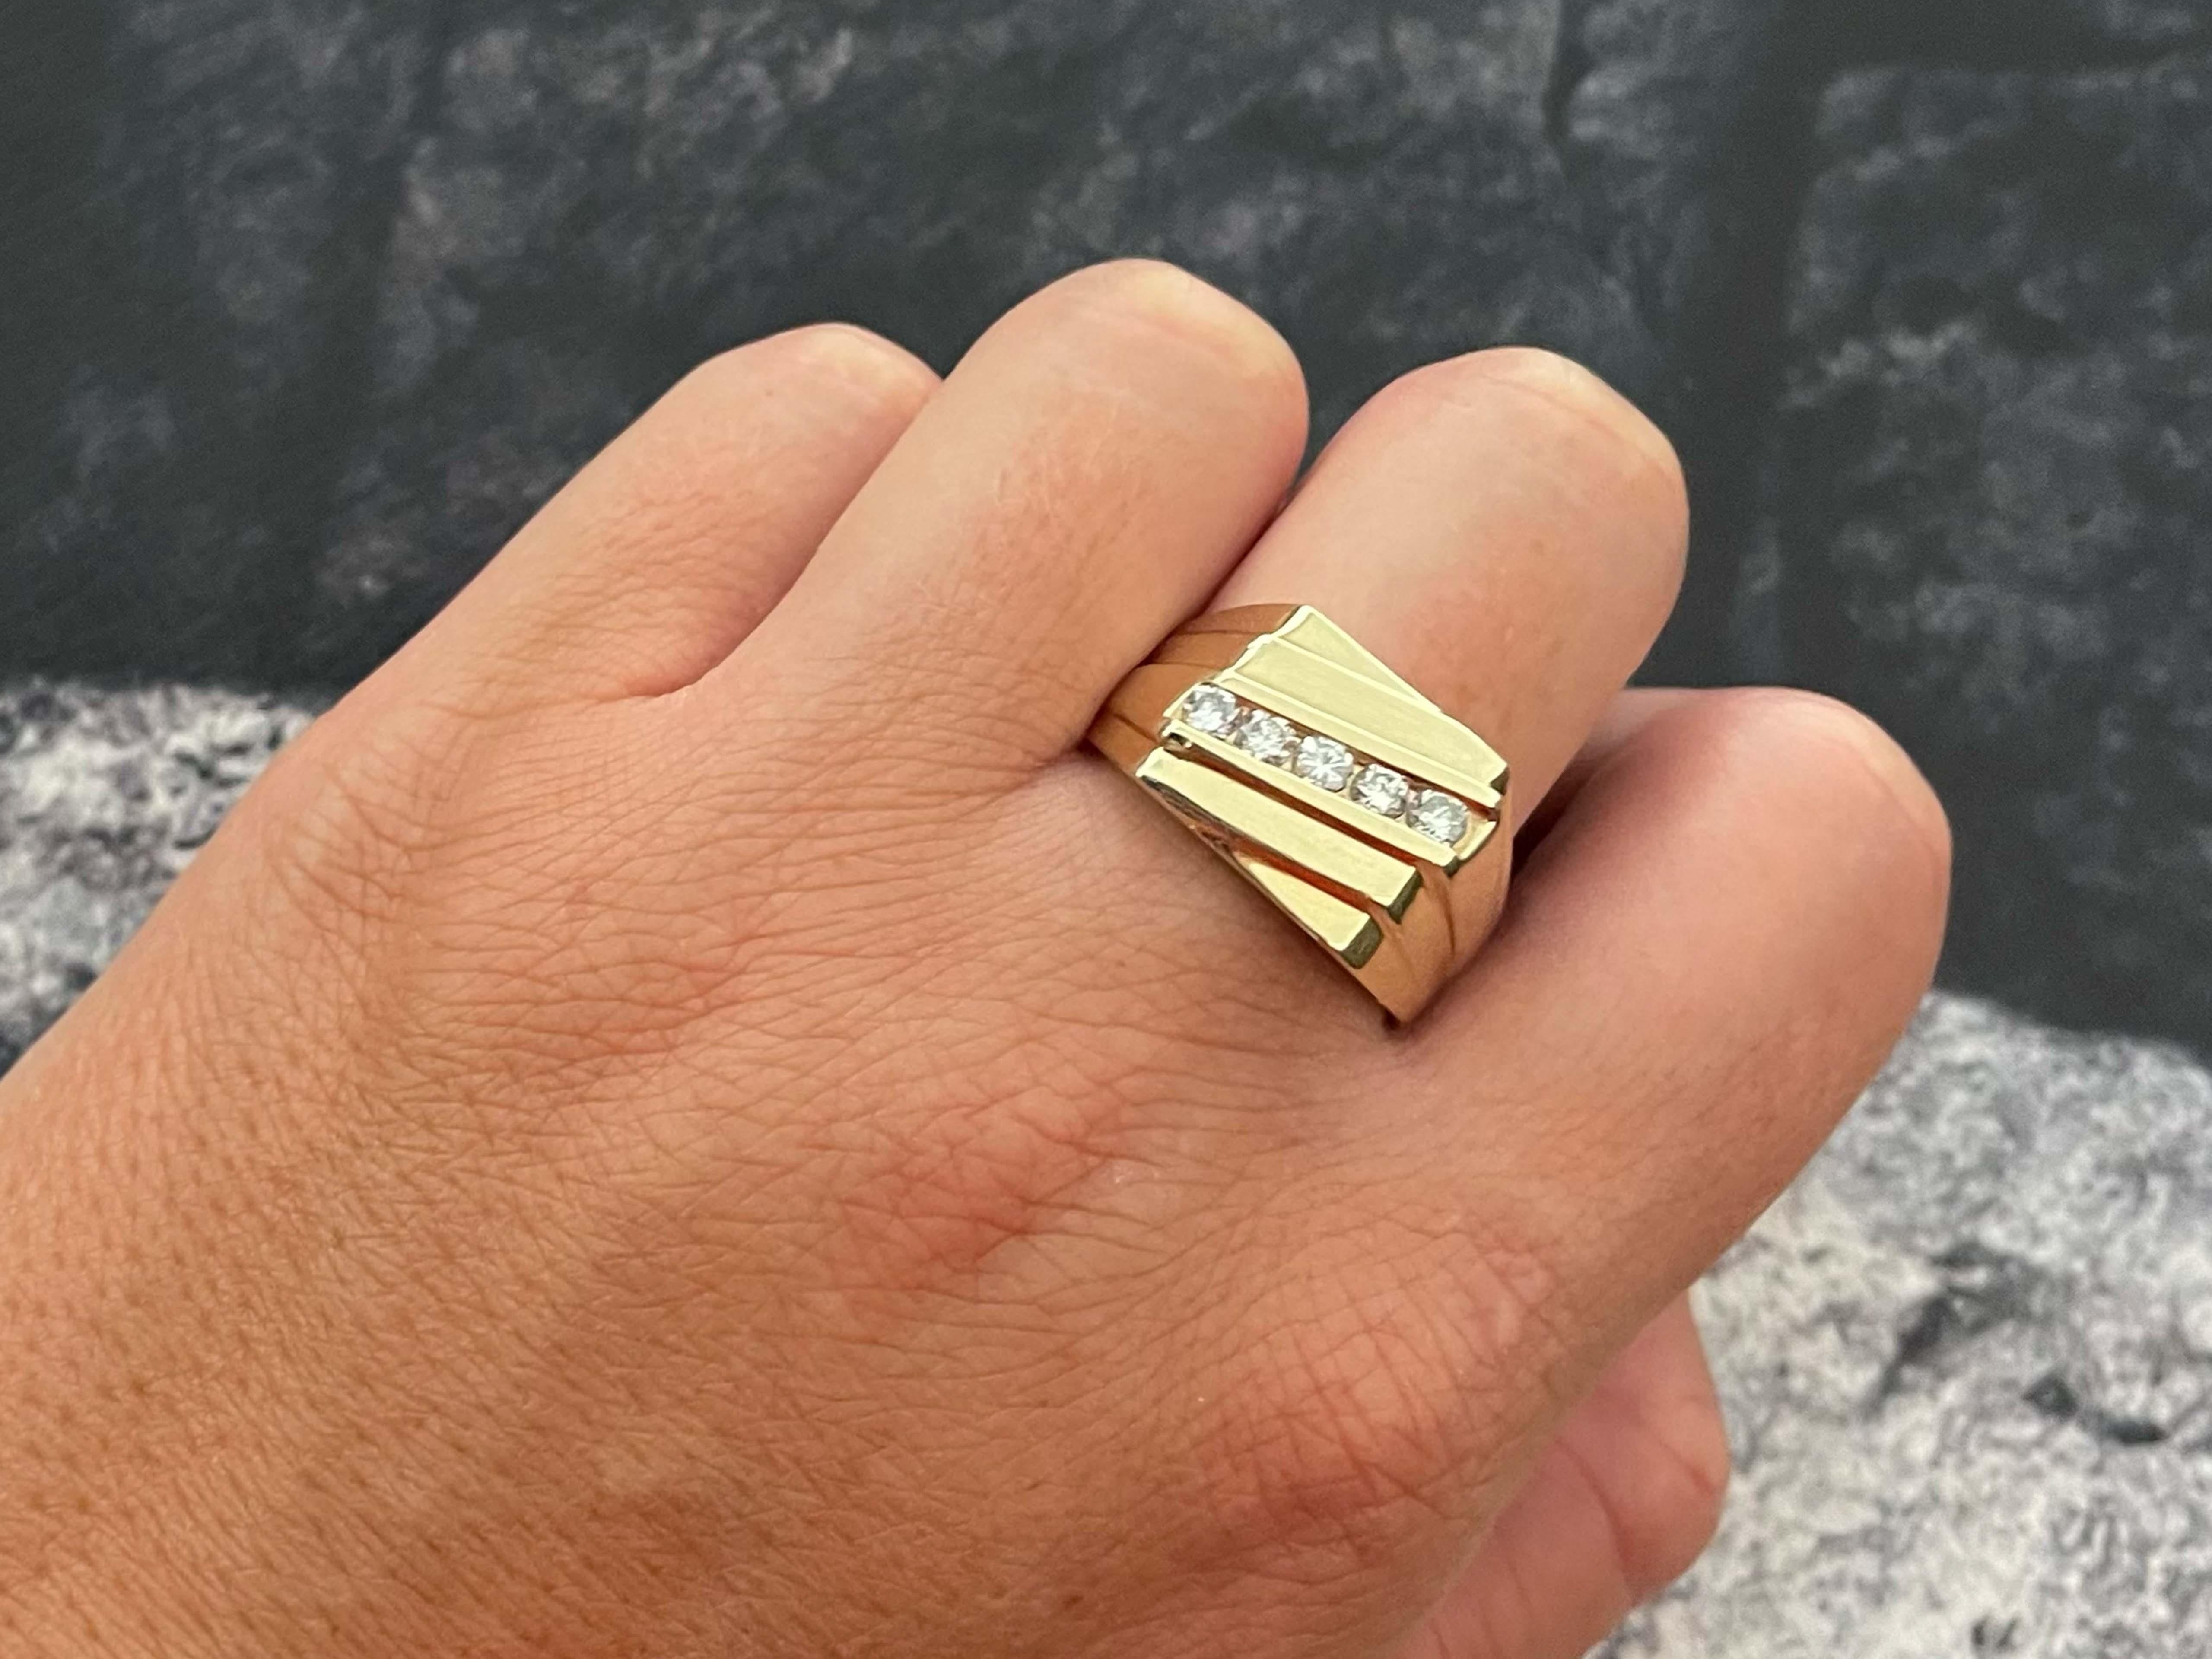 Item Specifications:

Metal: 14k Yellow Gold

Style: Statement Ring

Ring Size: 11.5 (resizing available for a fee)

Total Weight: 9.2 Grams

Gemstone Specifications: 5 brilliant cut diamonds

Diamond Carat Weight: 0.50 carats

Diamond Color: